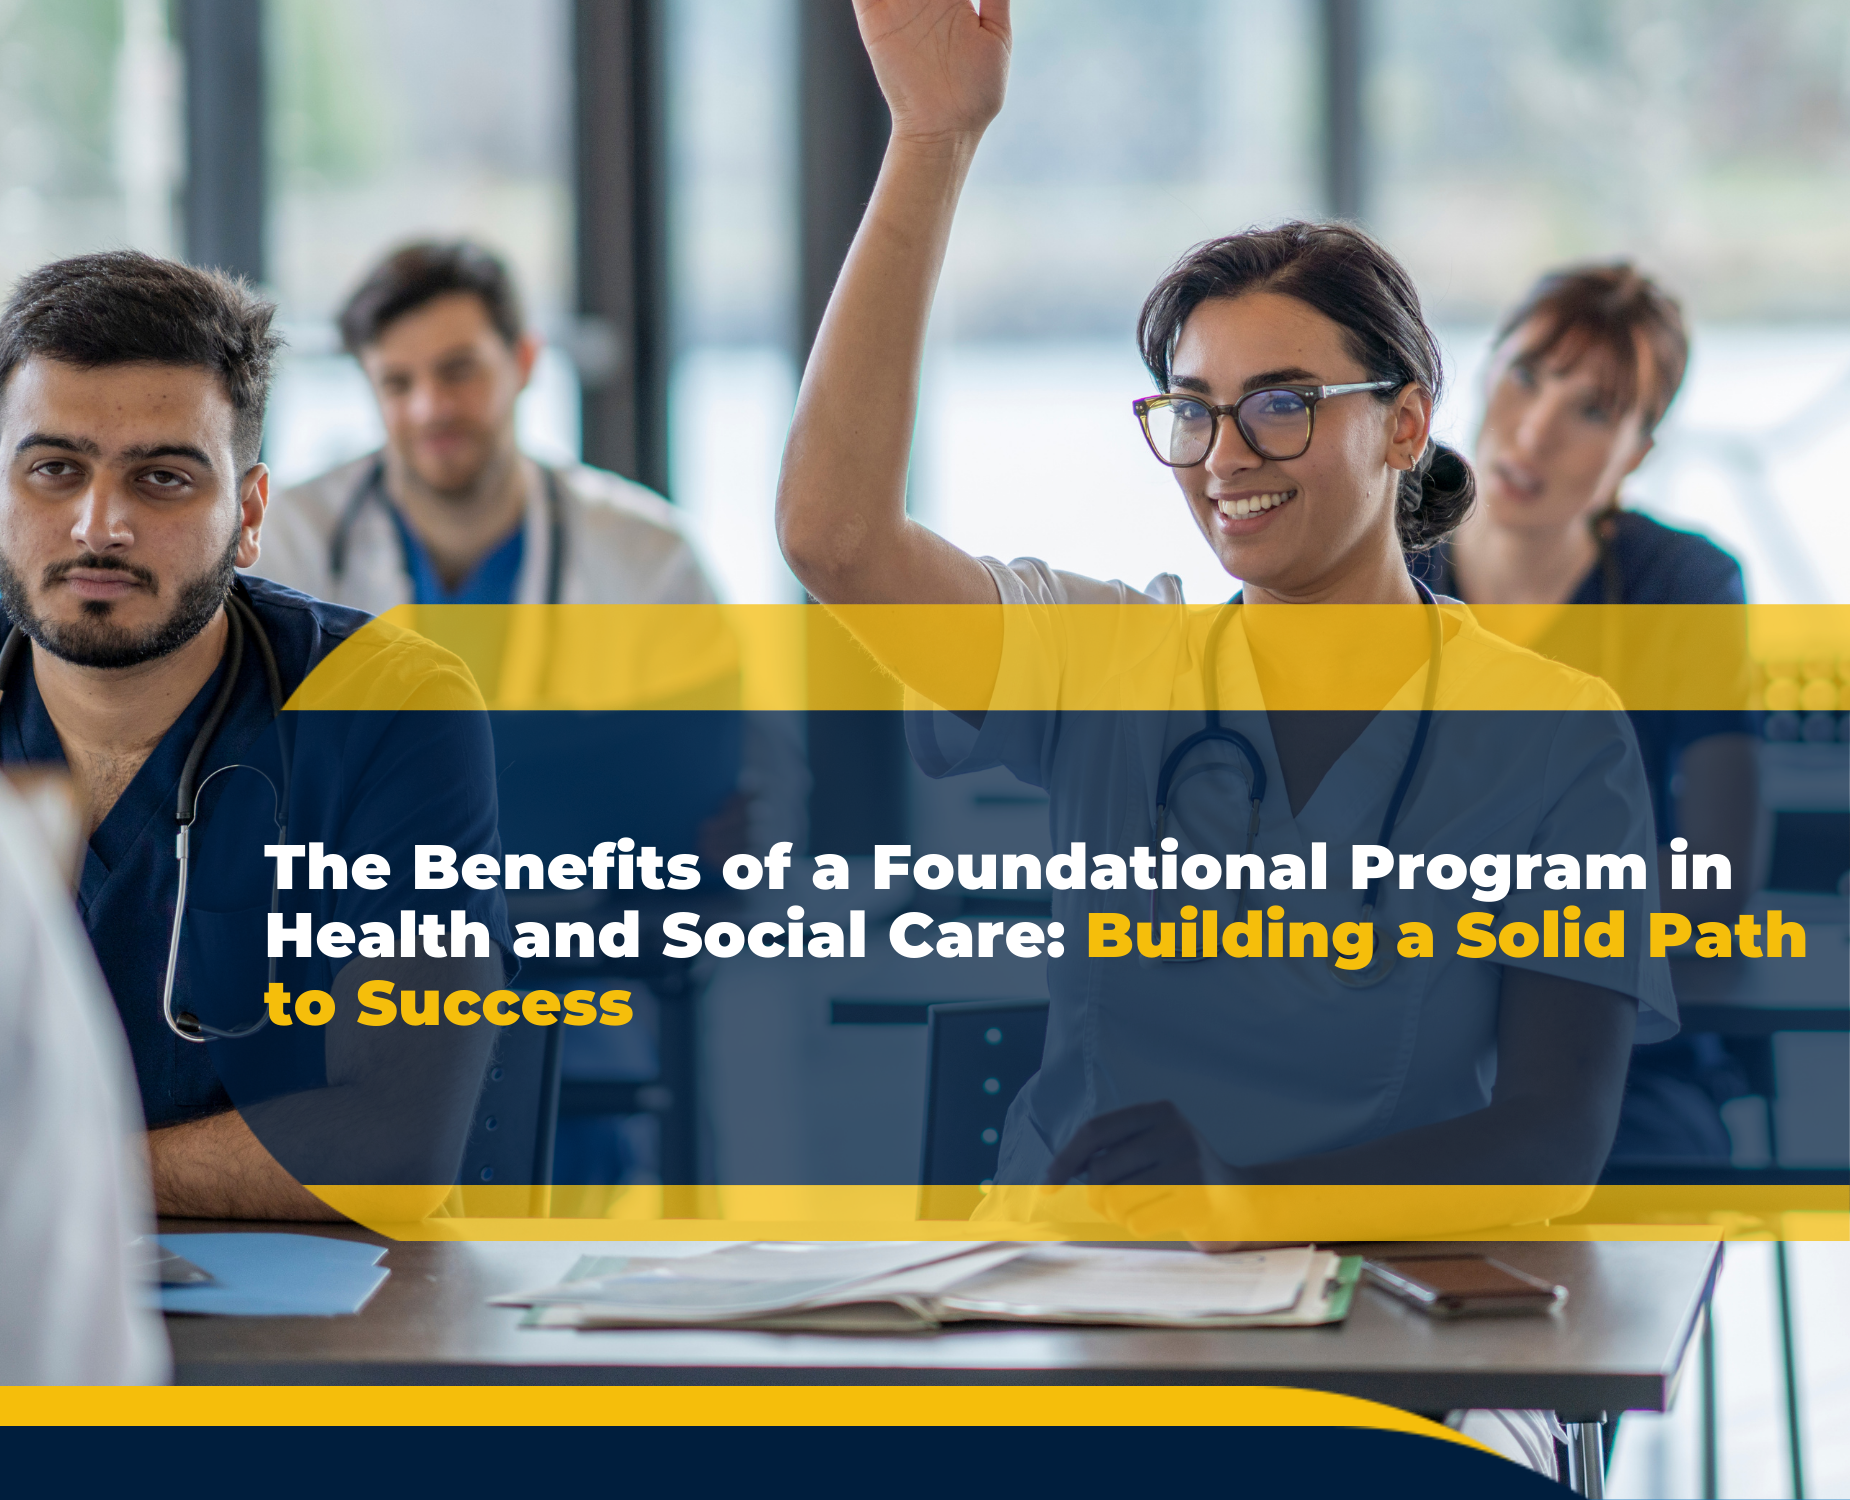 The Benefits of a Foundational Program in Health and Social Care: Building a Solid Path to Success